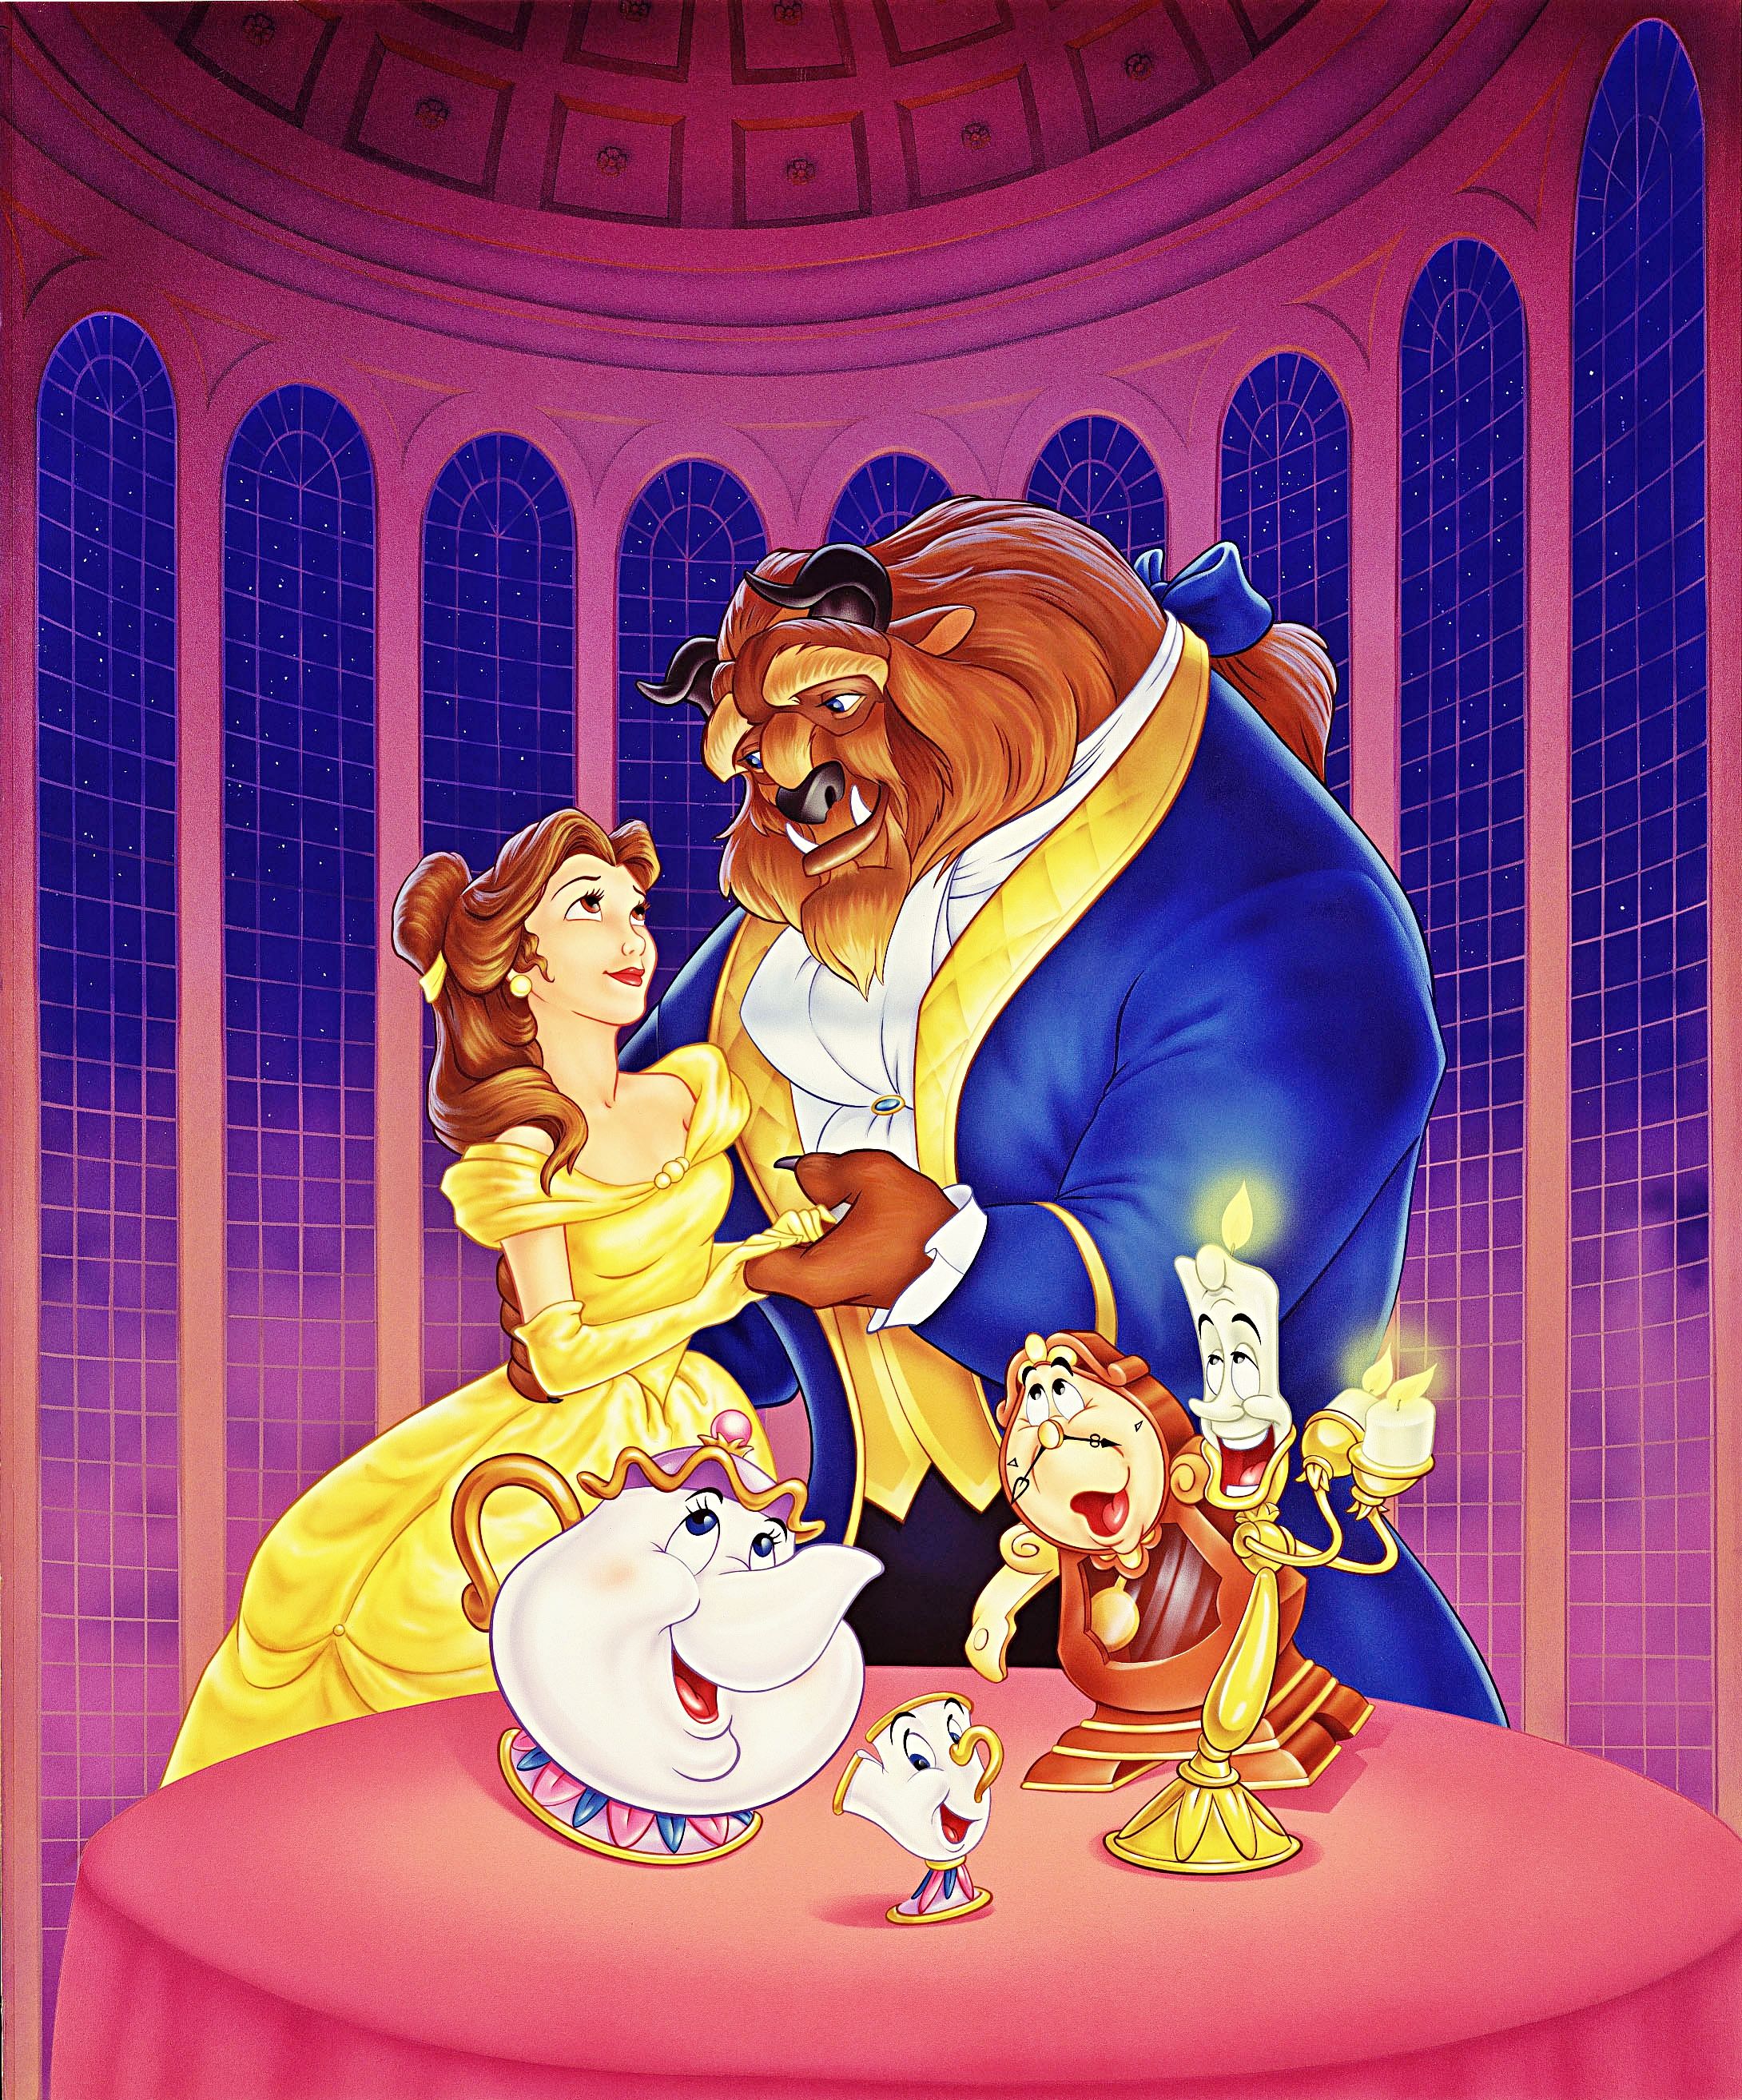 Walt Disney Posters Beauty and the Beast HD Wallpaper Image for PC